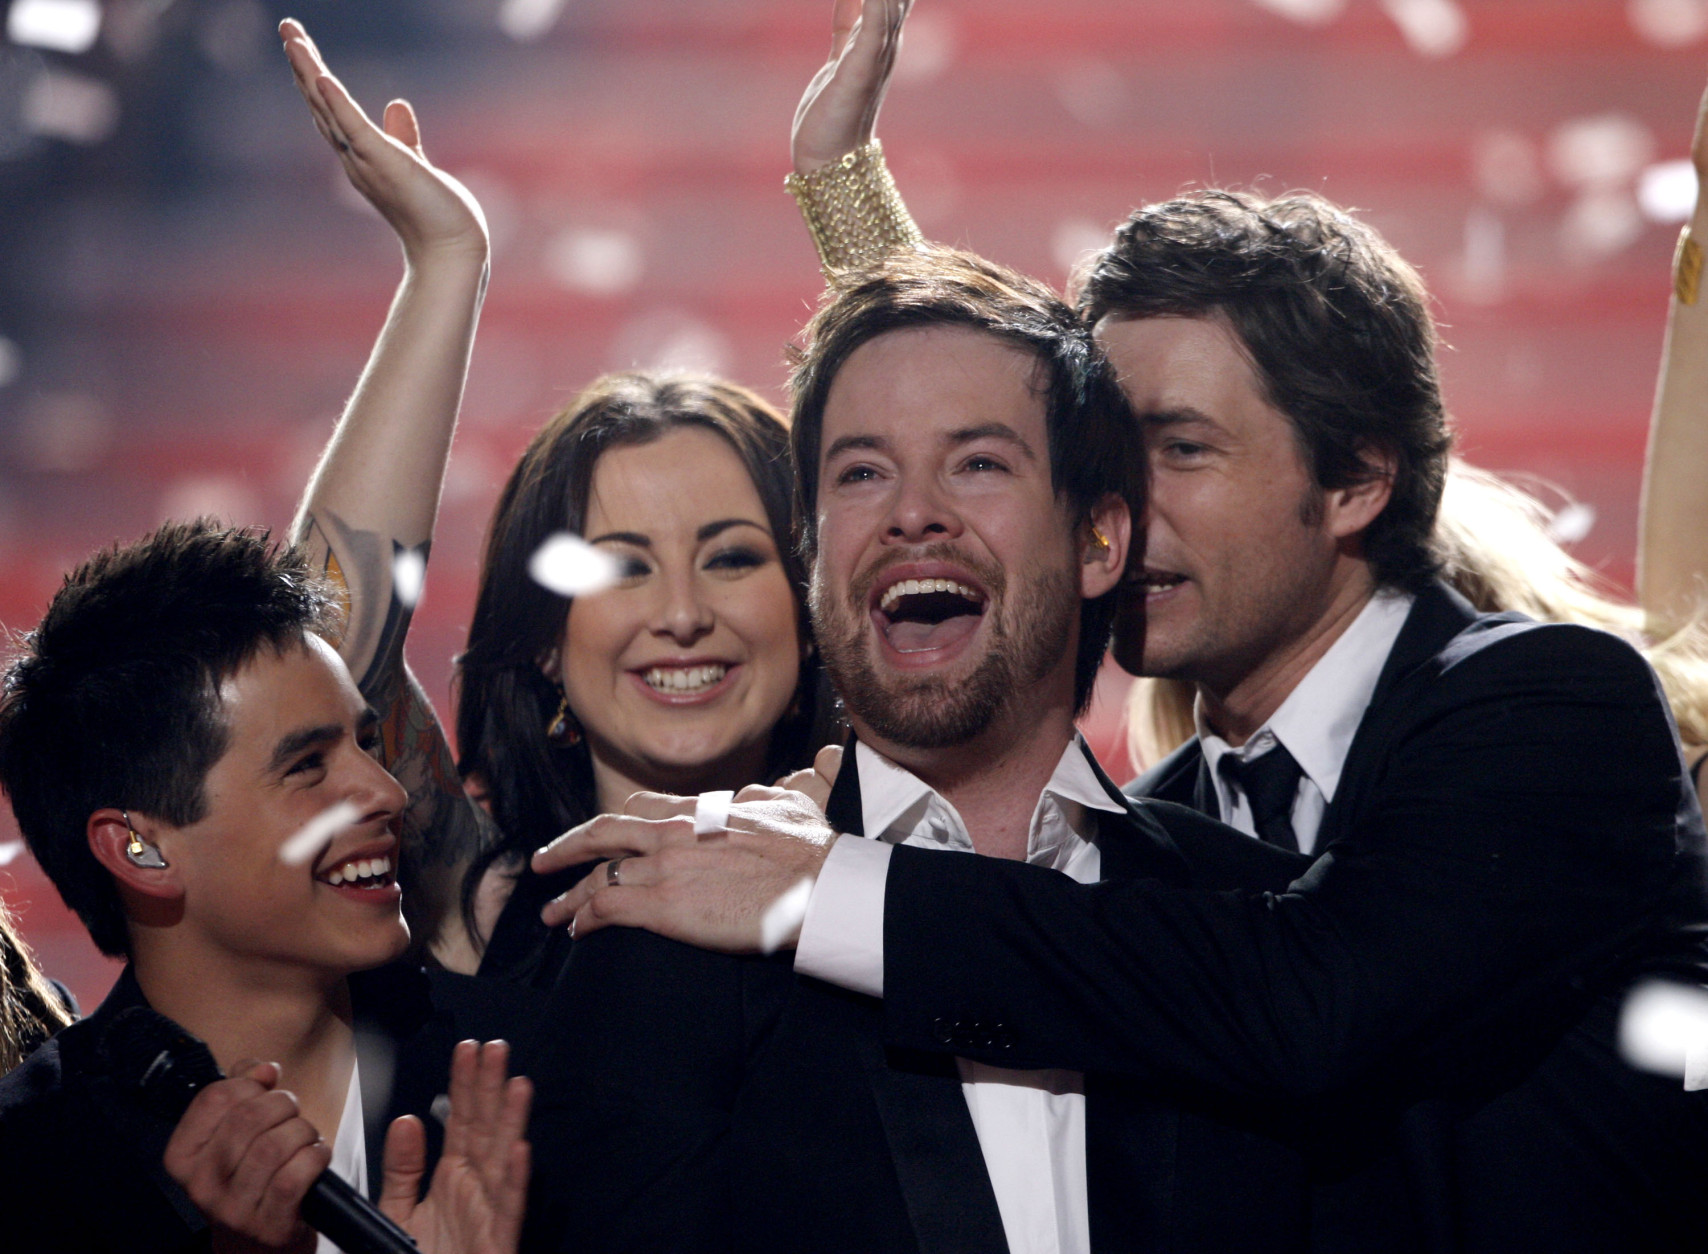 David Cook, center, is congratulated after being named the new American Idol during the season finale of American Idol on Wednesday May 21, 2008, in Los Angeles. (Mark Mainz/AP Images for Fox)